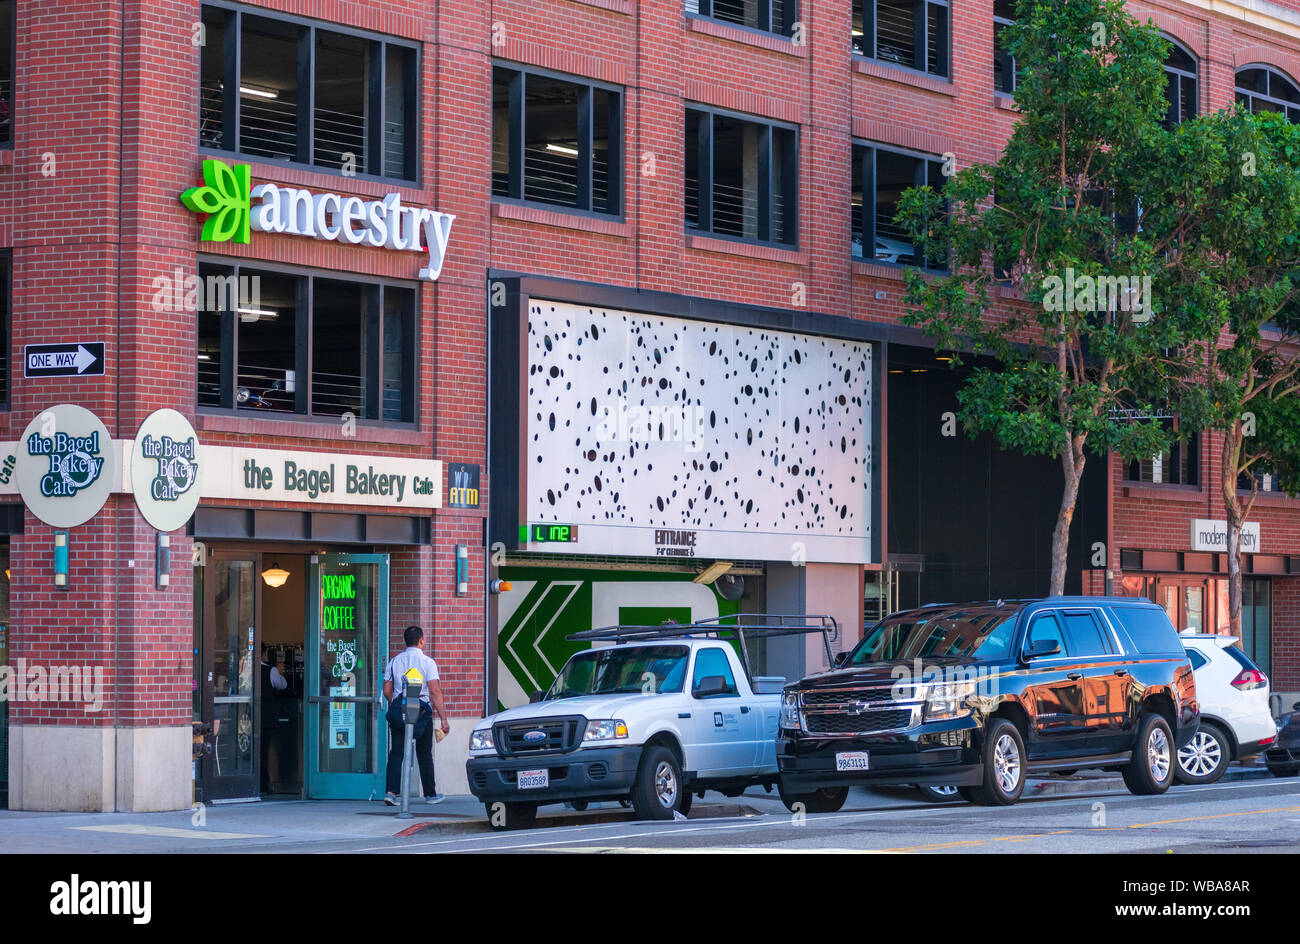 Ancestry for-profit genealogy company office facade in Silicon Valley Stock Photo